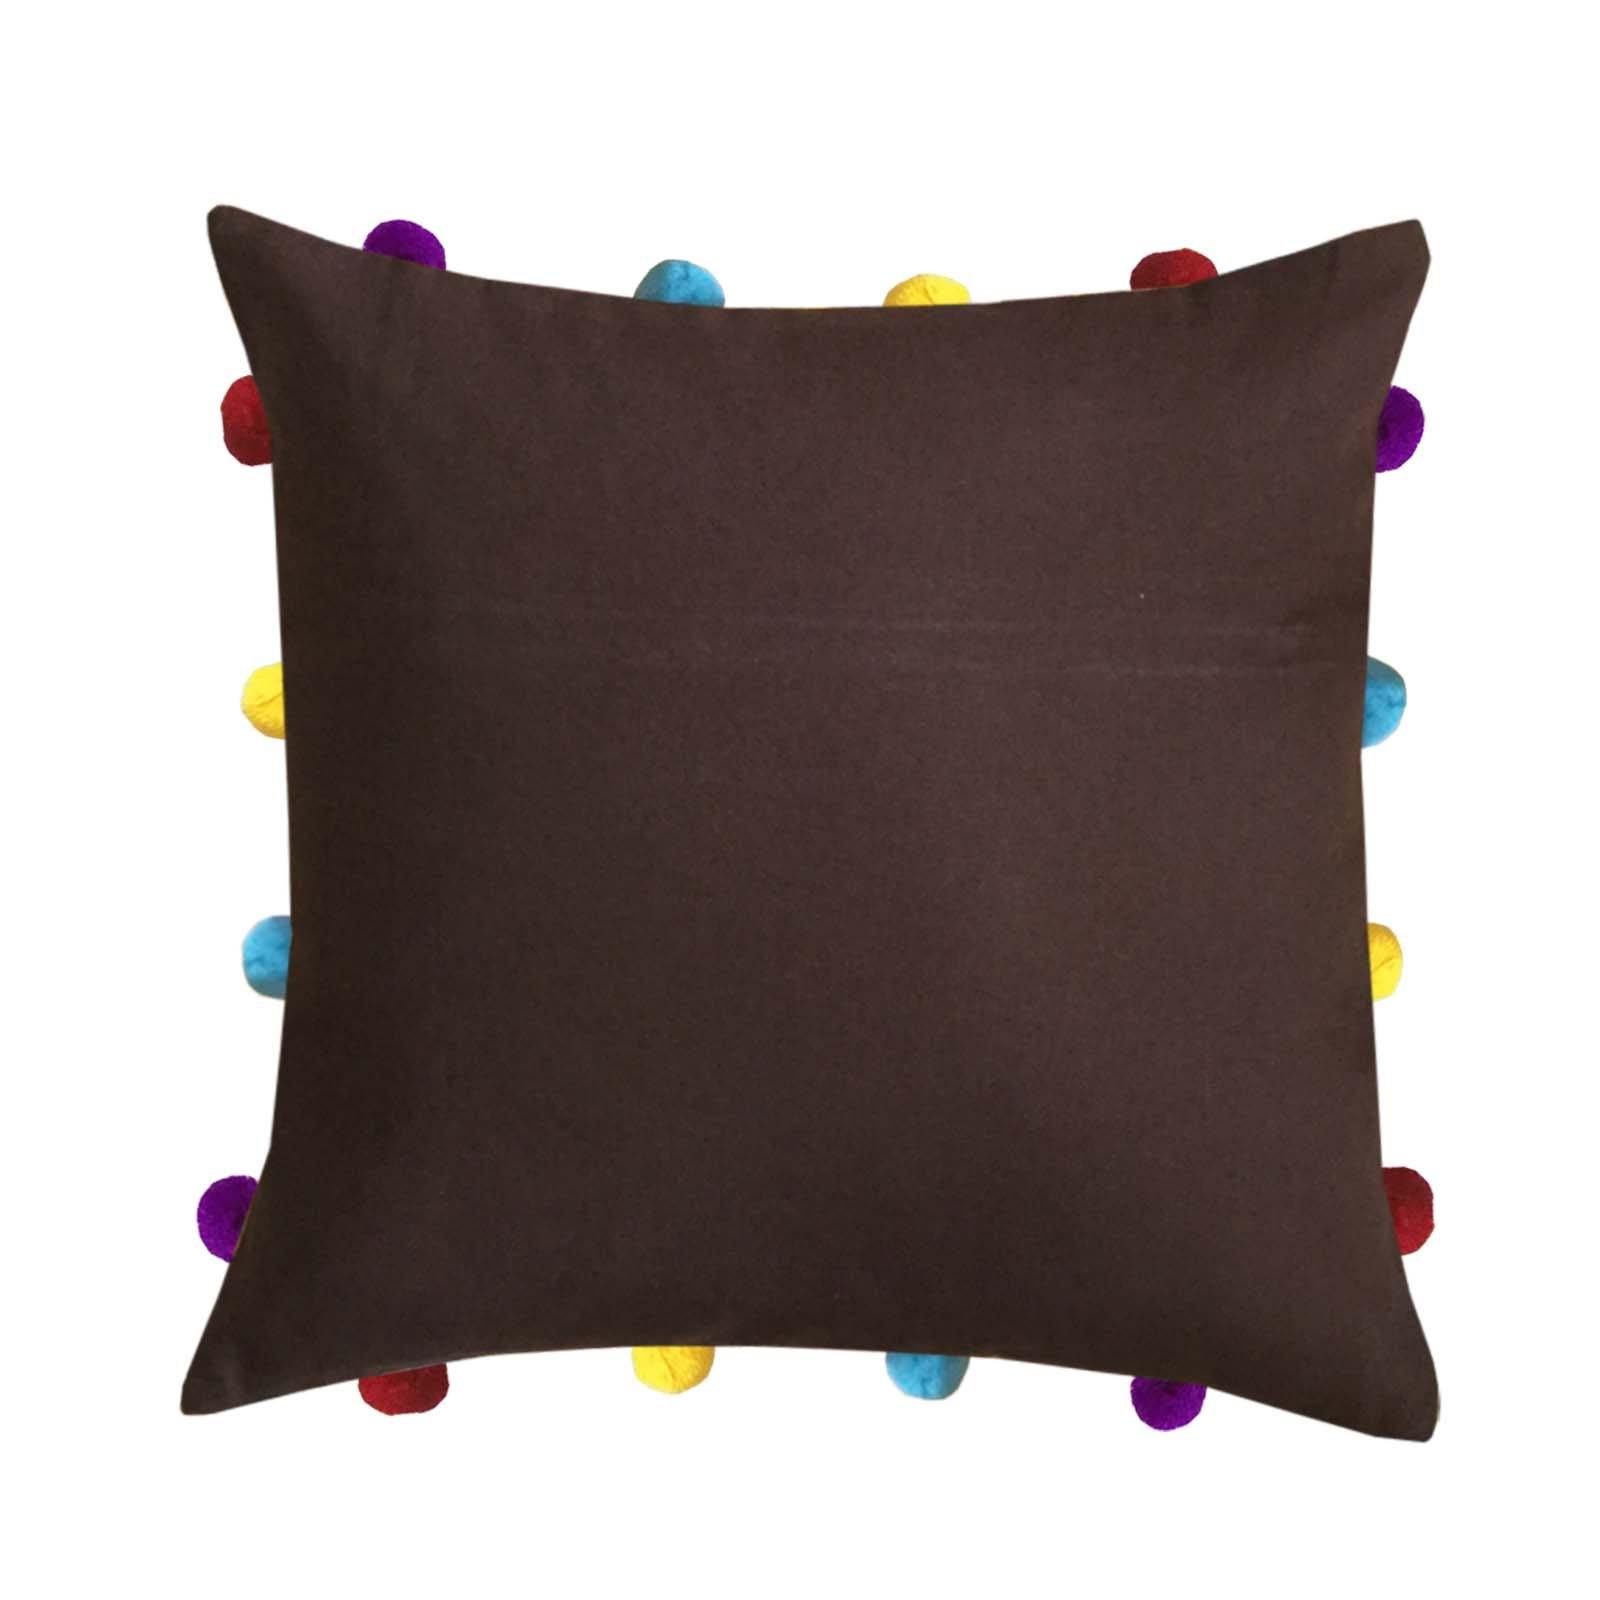 Lushomes French Roast Cushion Cover with Colorful pom poms (Single pc, 14 x 14”) - Lushomes